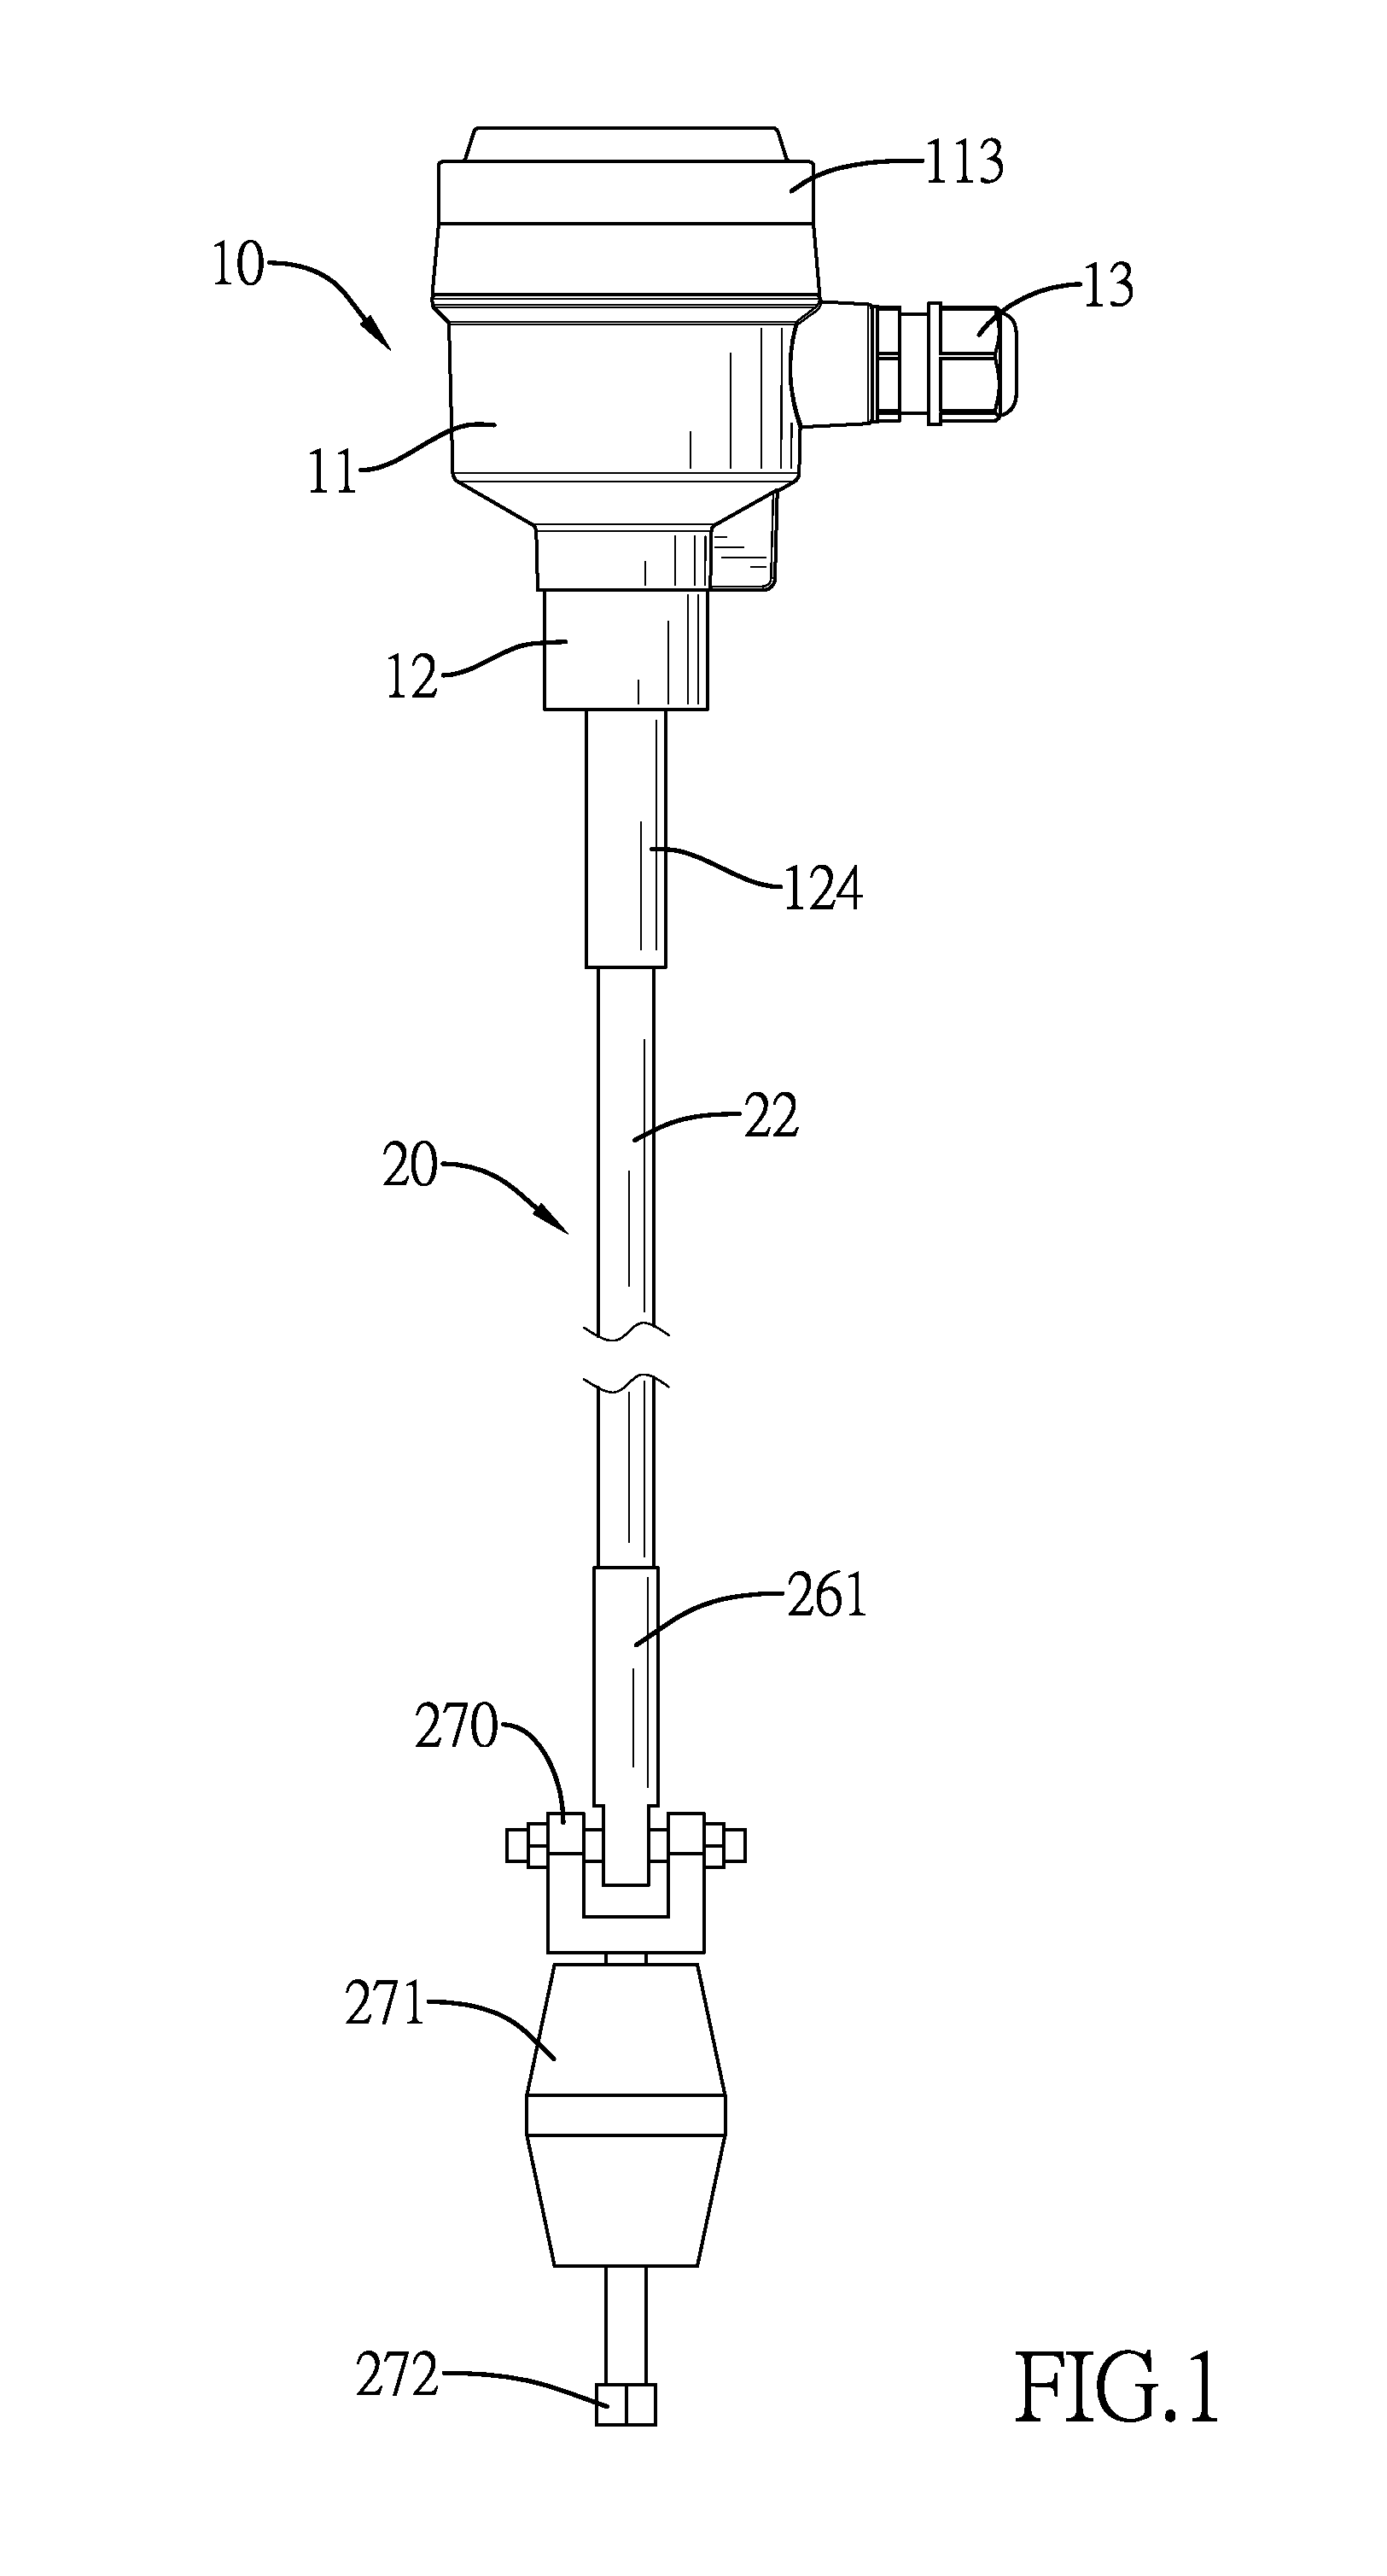 Cable-Based Sensor for Detecting Material Level and Temperature